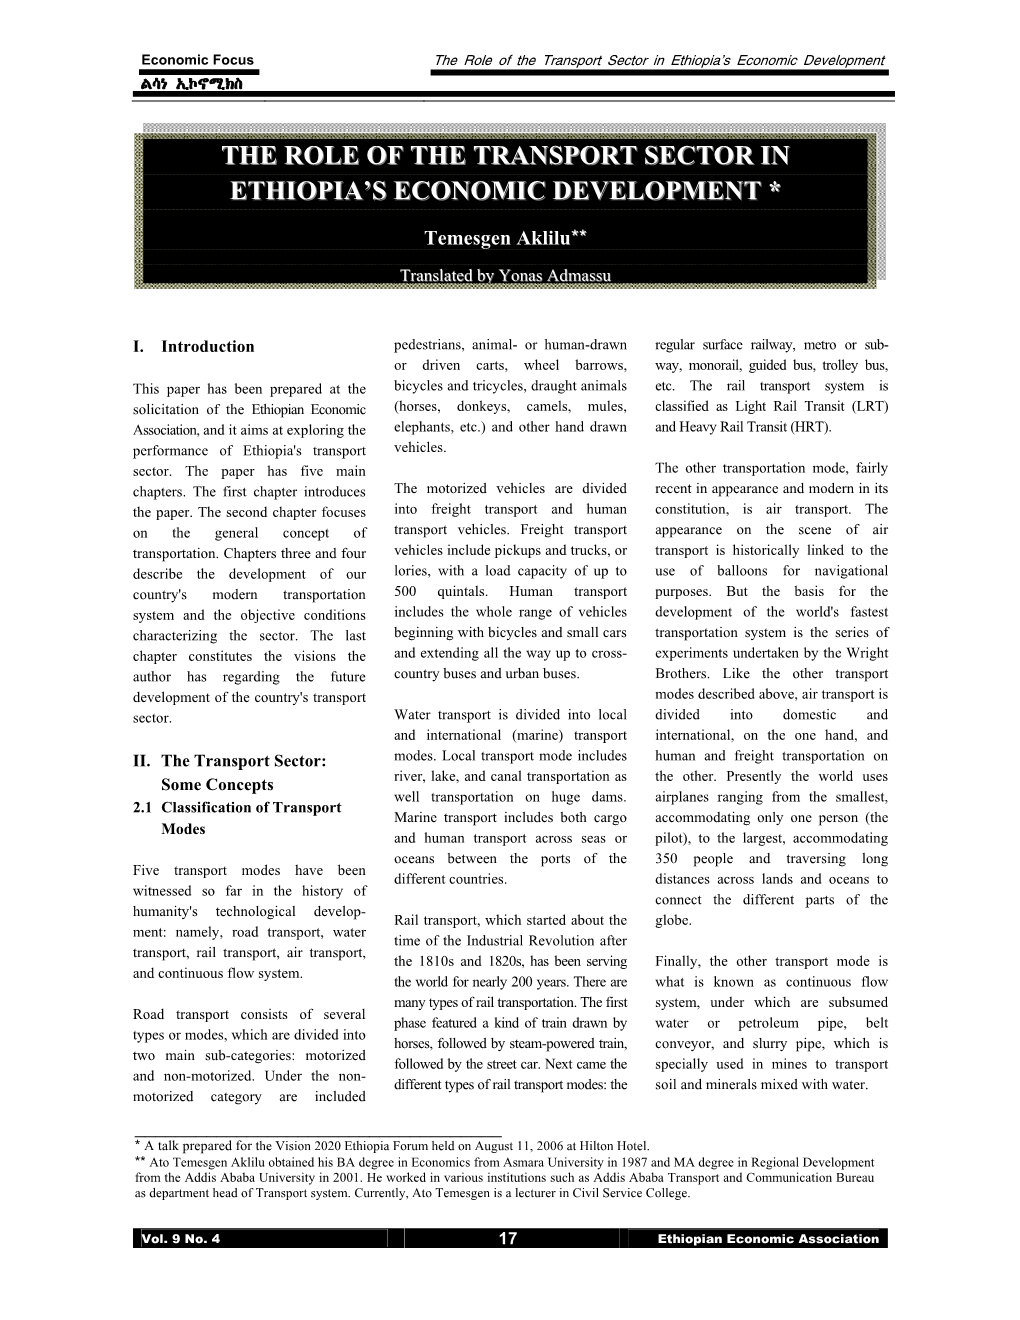 The Role of the Transport Sector in Ethiopia's